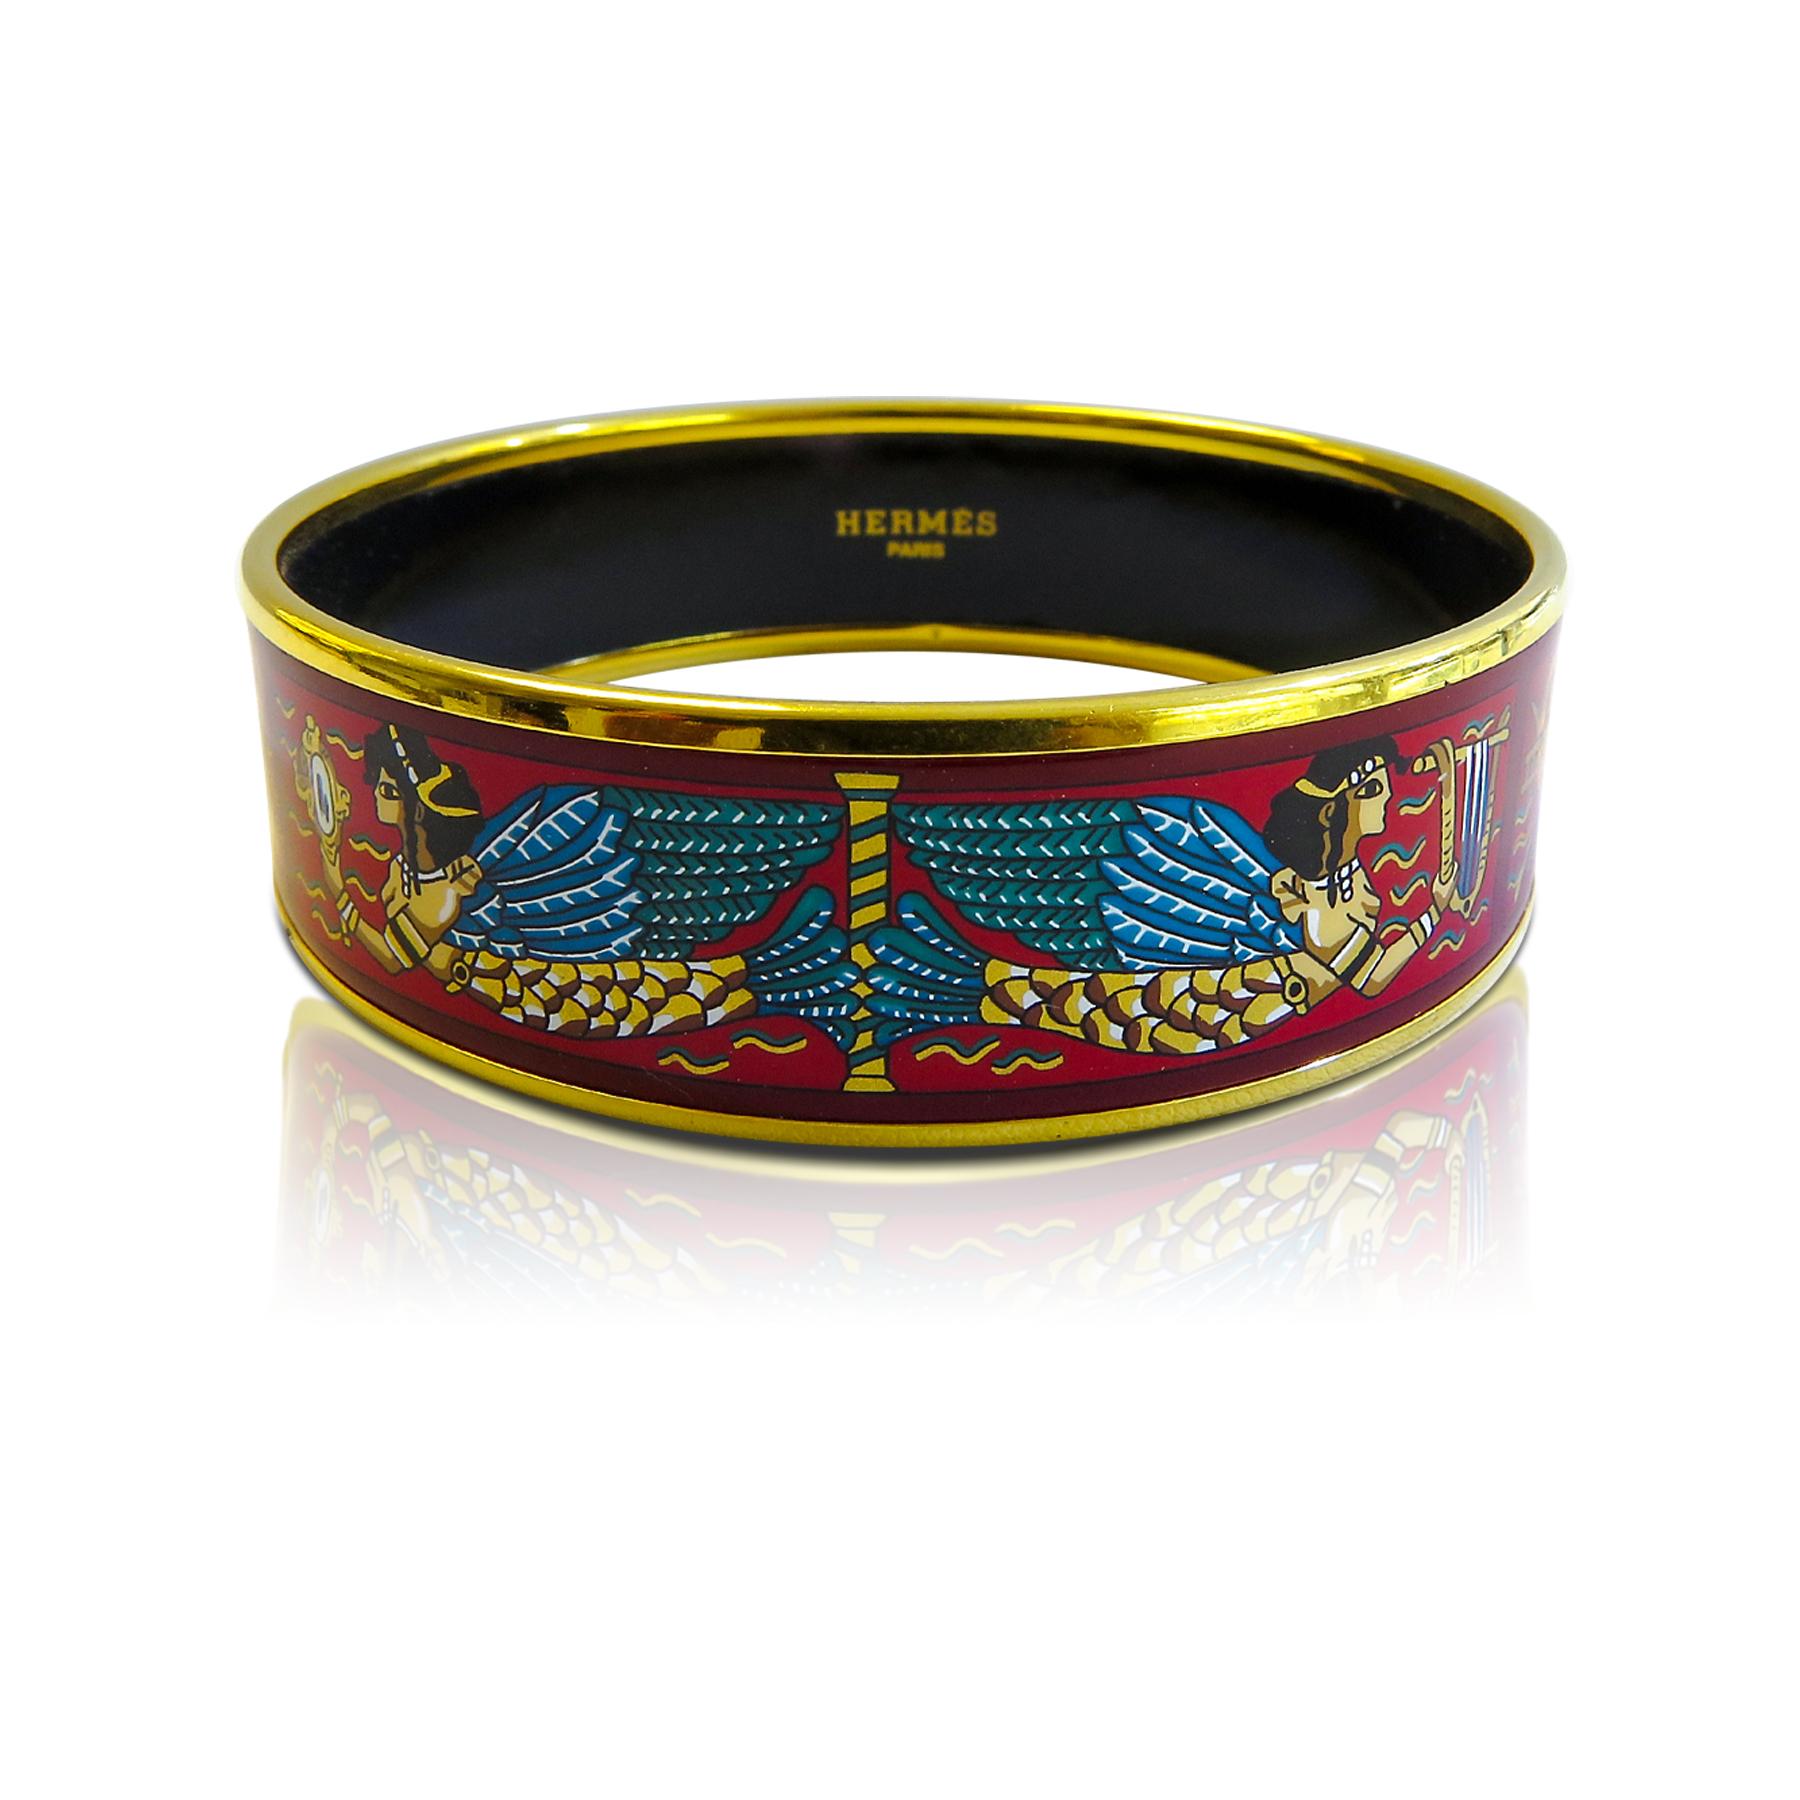 This Hermes bangle features an18 Karat gold plated with a printed enamel. Carved in Austria, It weighs 40.8 grams, 20mm wide and has an inner diameter of 2.5 inches to give a comfortable fit in your wrist.

Condition: Excellent 